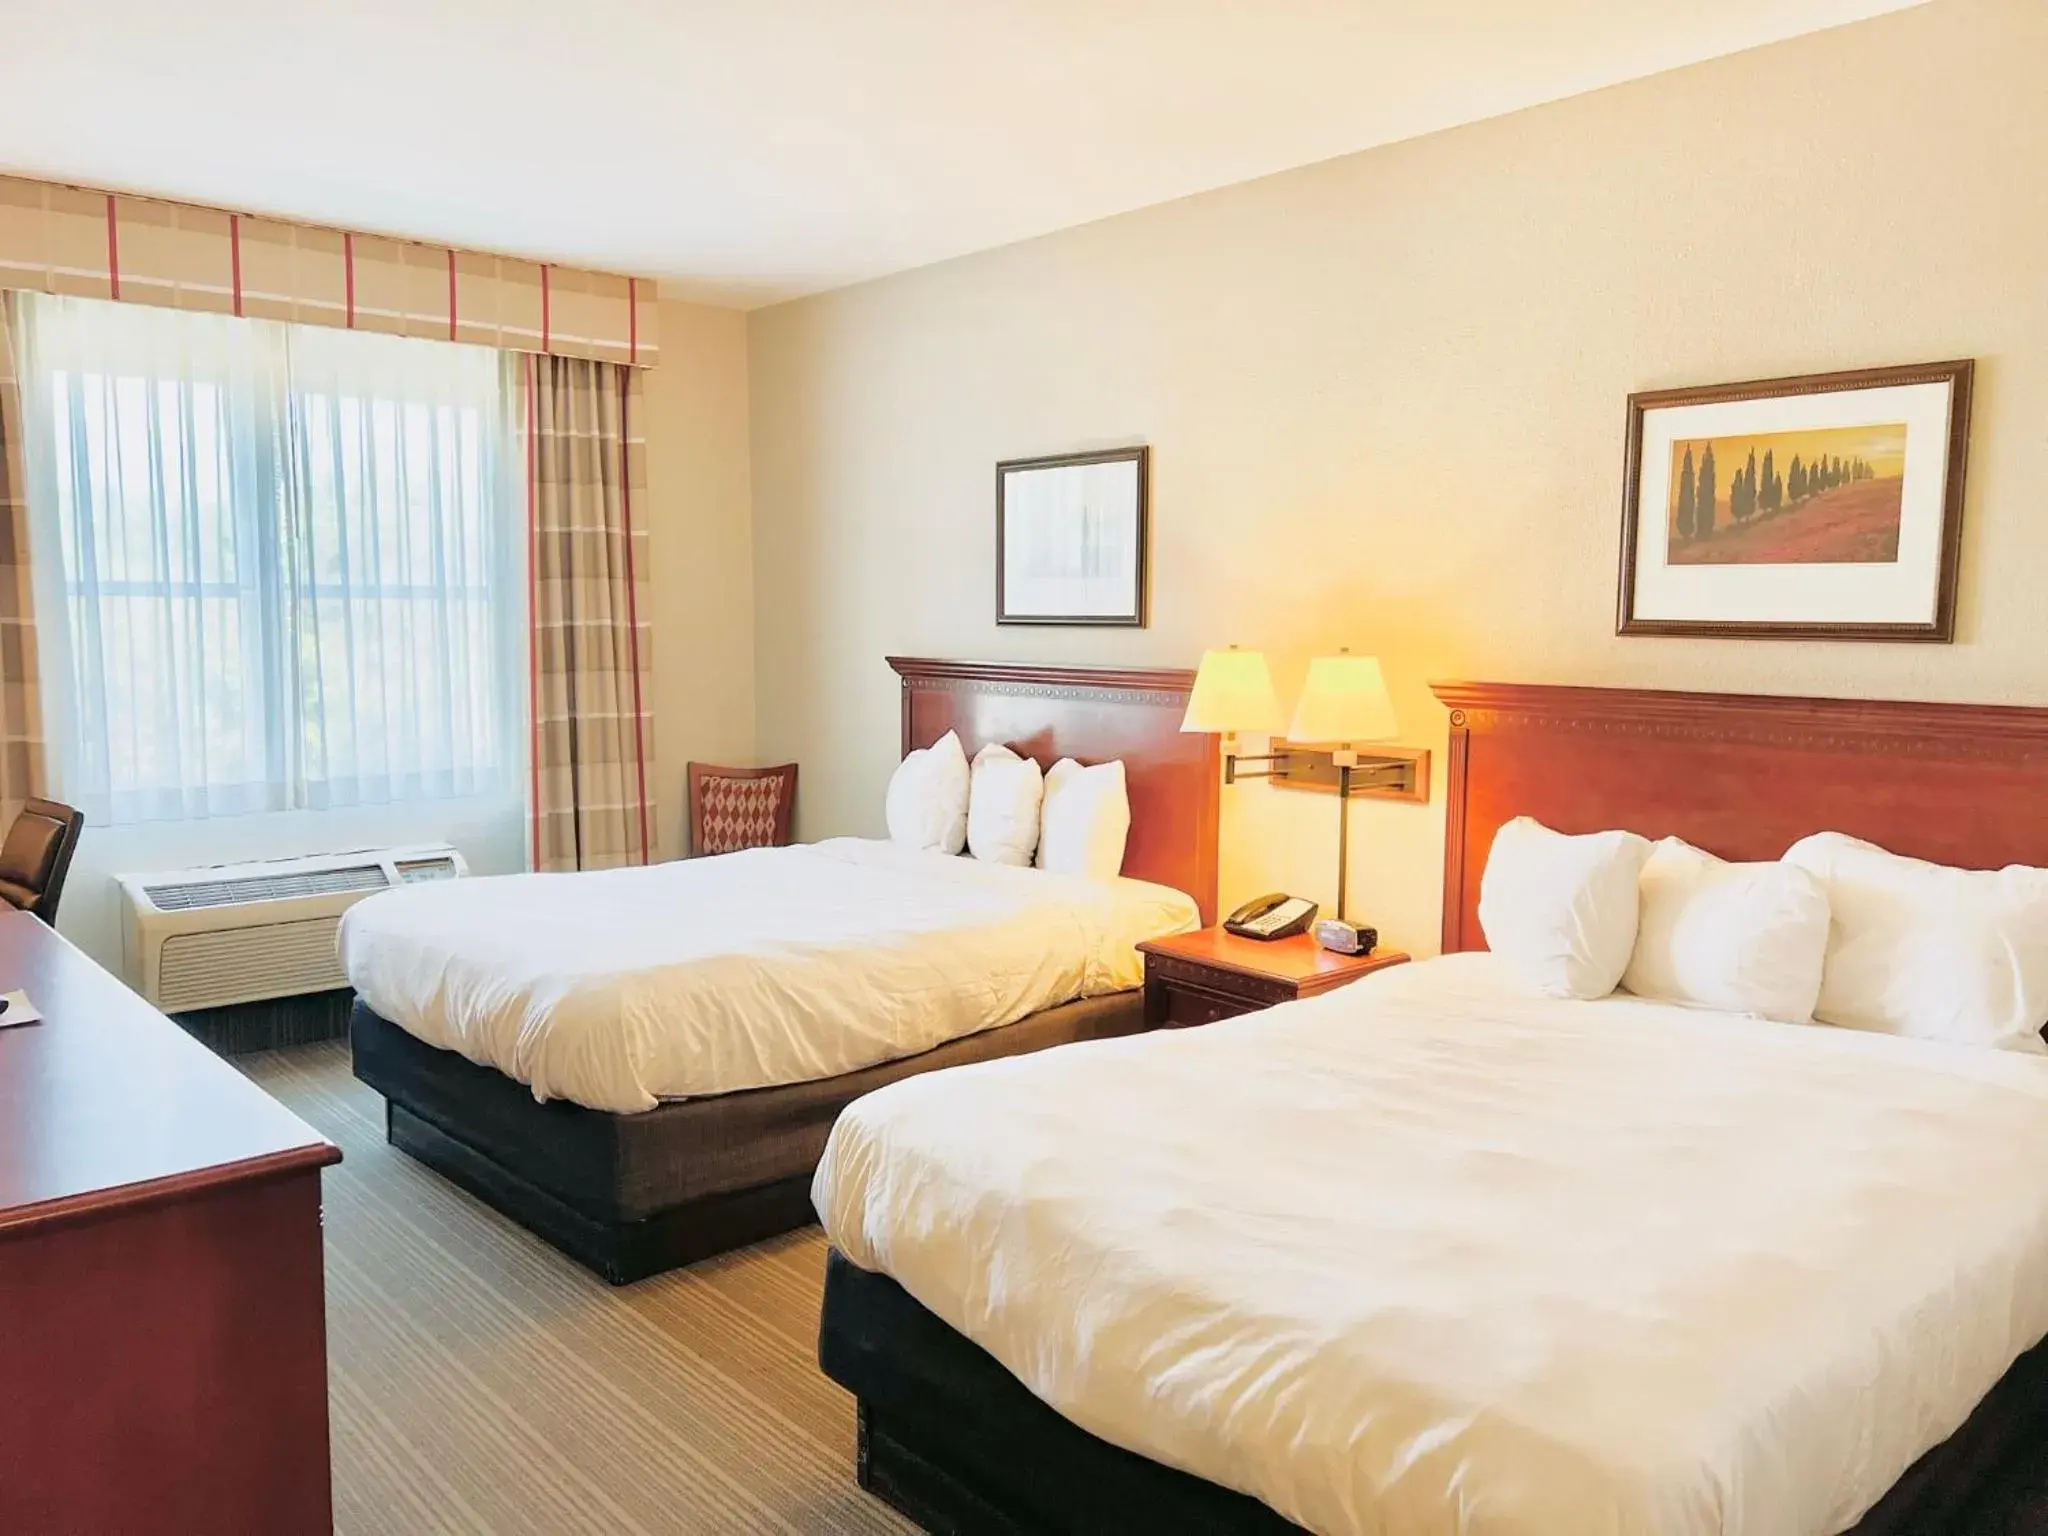 Bed in Country Inn & Suites by Radisson, Emporia, VA